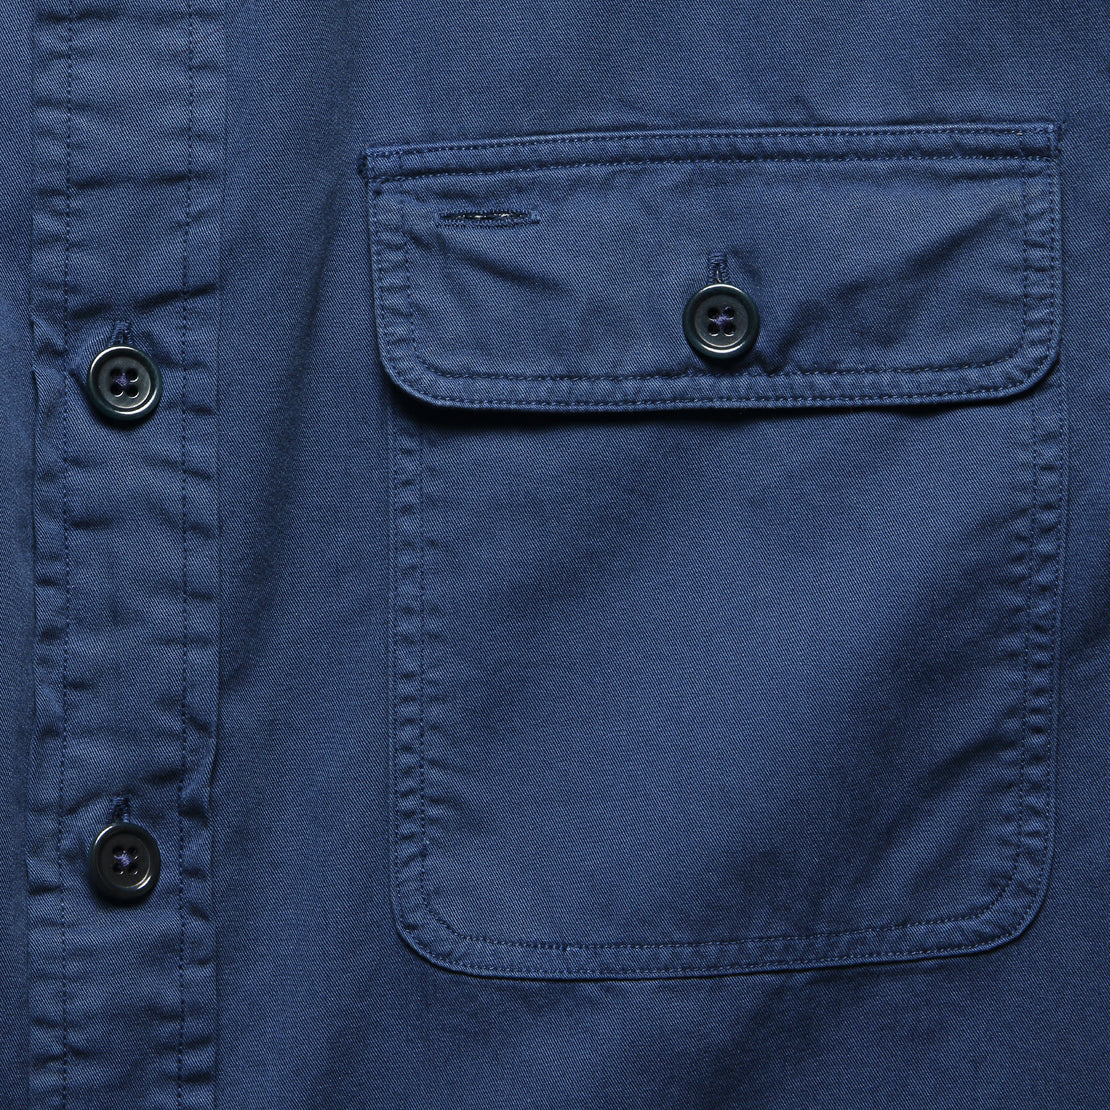 Matlock Army Twill Workshirt - Navy - RRL - STAG Provisions - Tops - L/S Woven - Solid